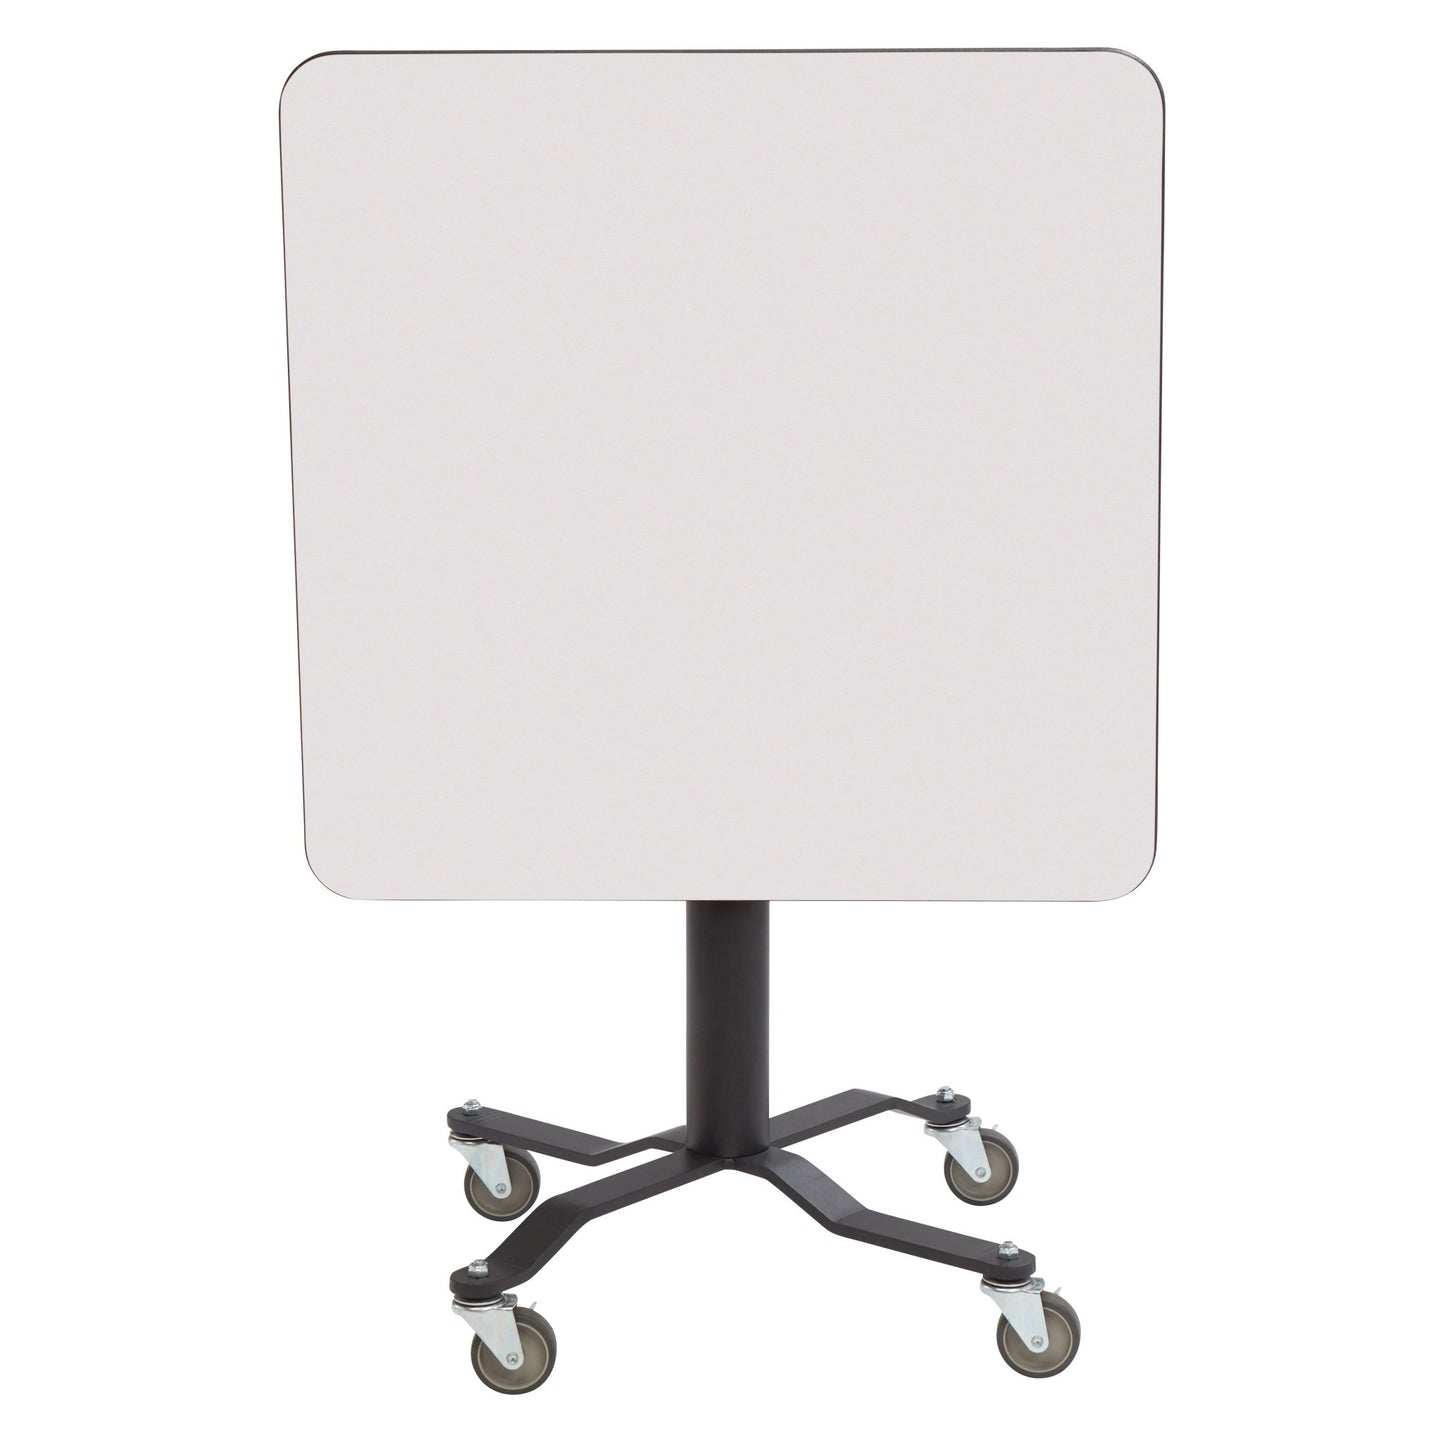 NPS Cafe Time II Table, 24" Square, Whiteboard Top, MDF Core, Protect Edge (NationalPublic Seating NPS-PCT324MDPEWB) - SchoolOutlet